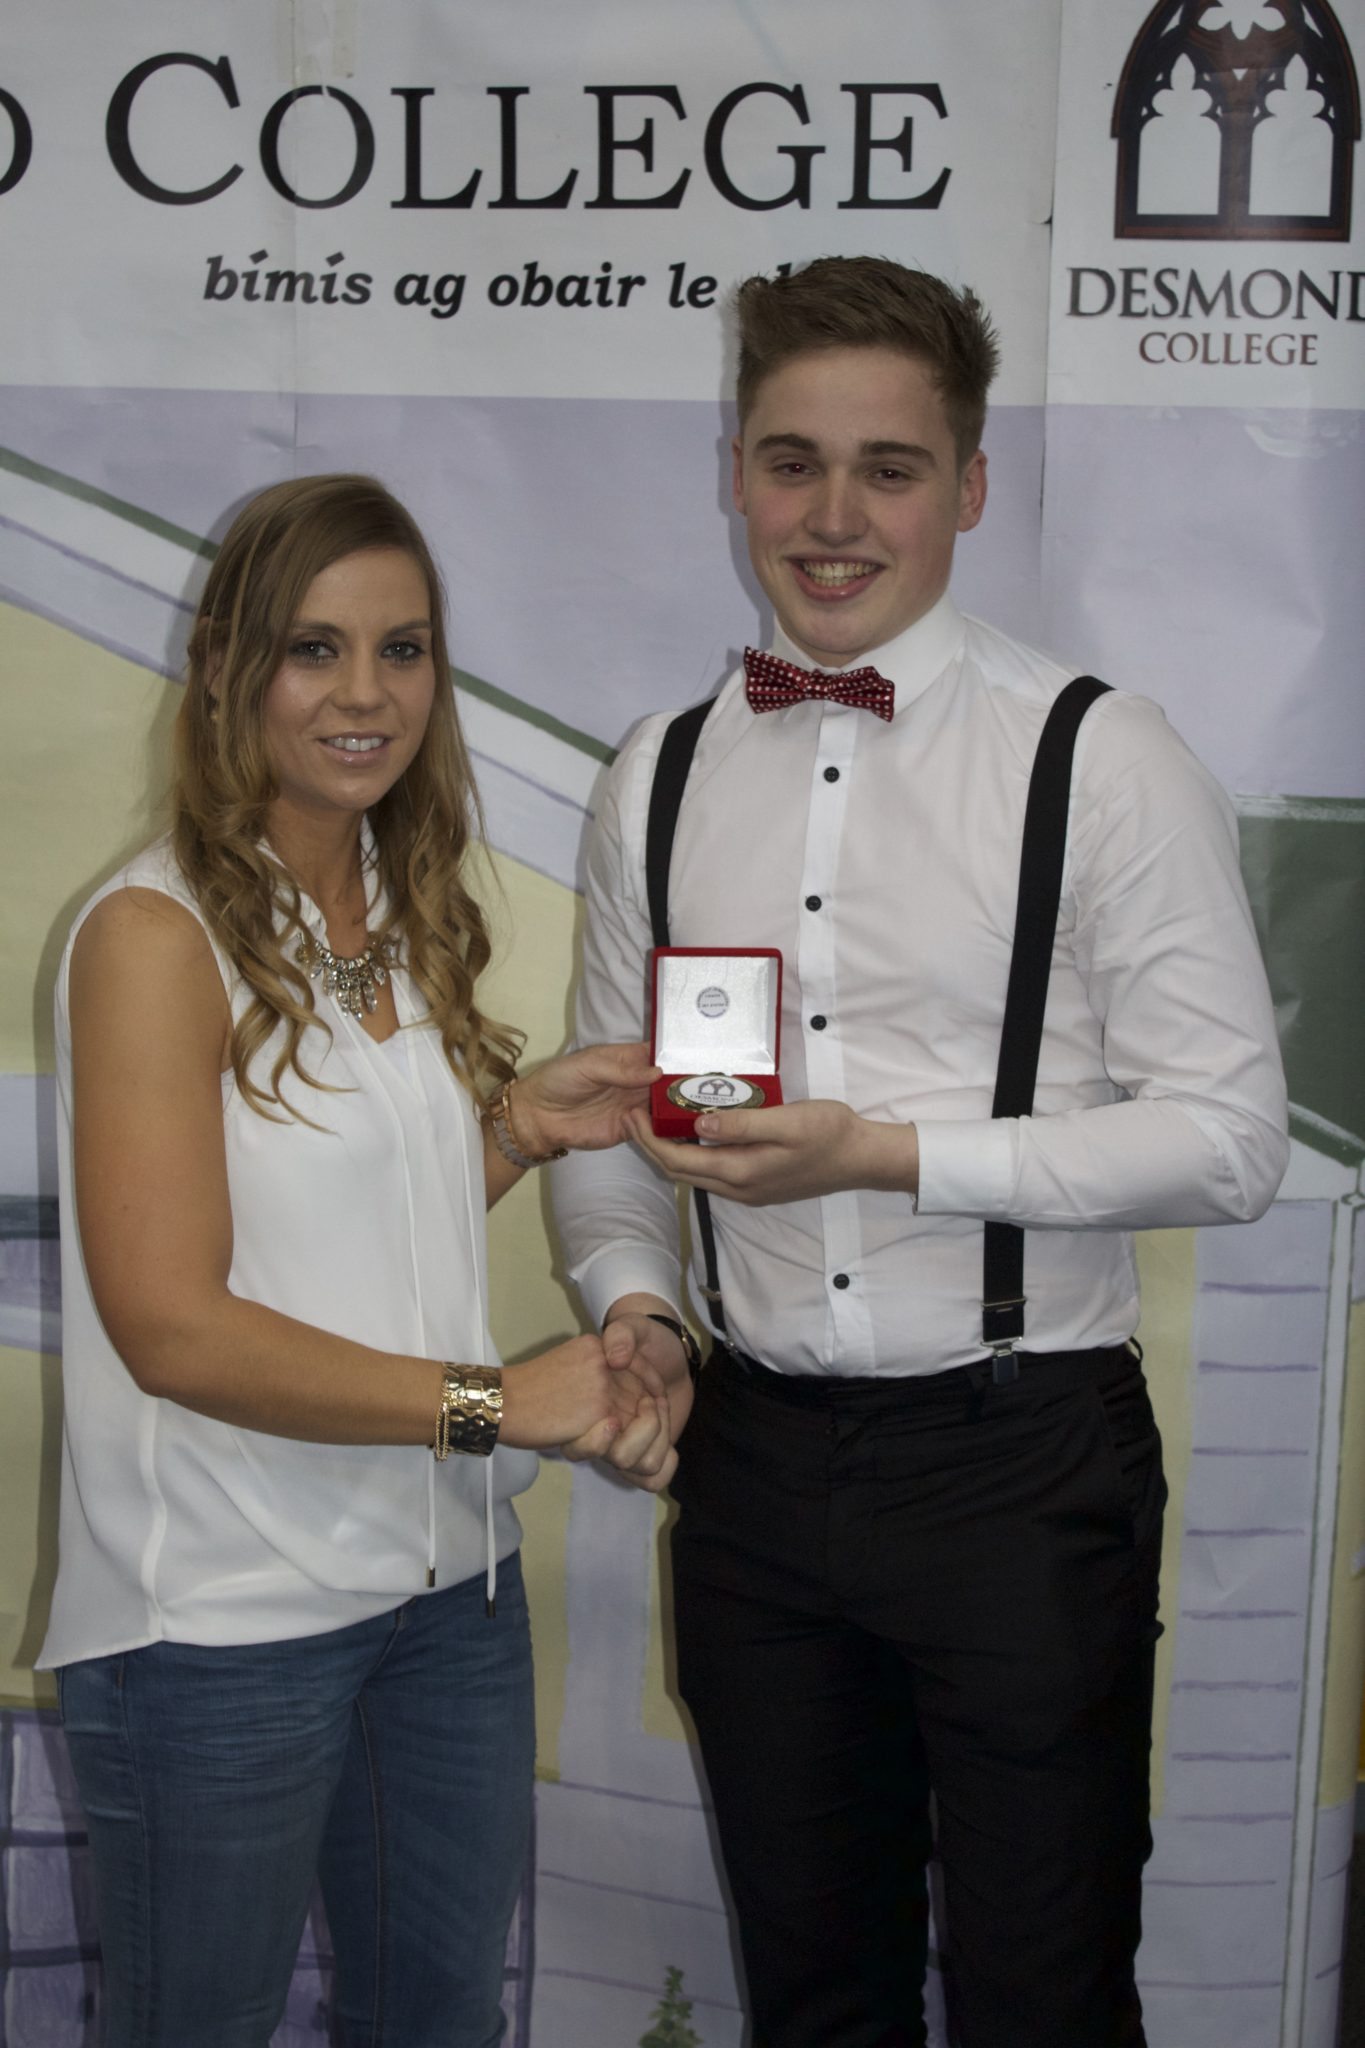 Desmond College Leaving Certificate Graduation Awards 2015: Sports Awards: Mikey Sexton with Ms Corkery